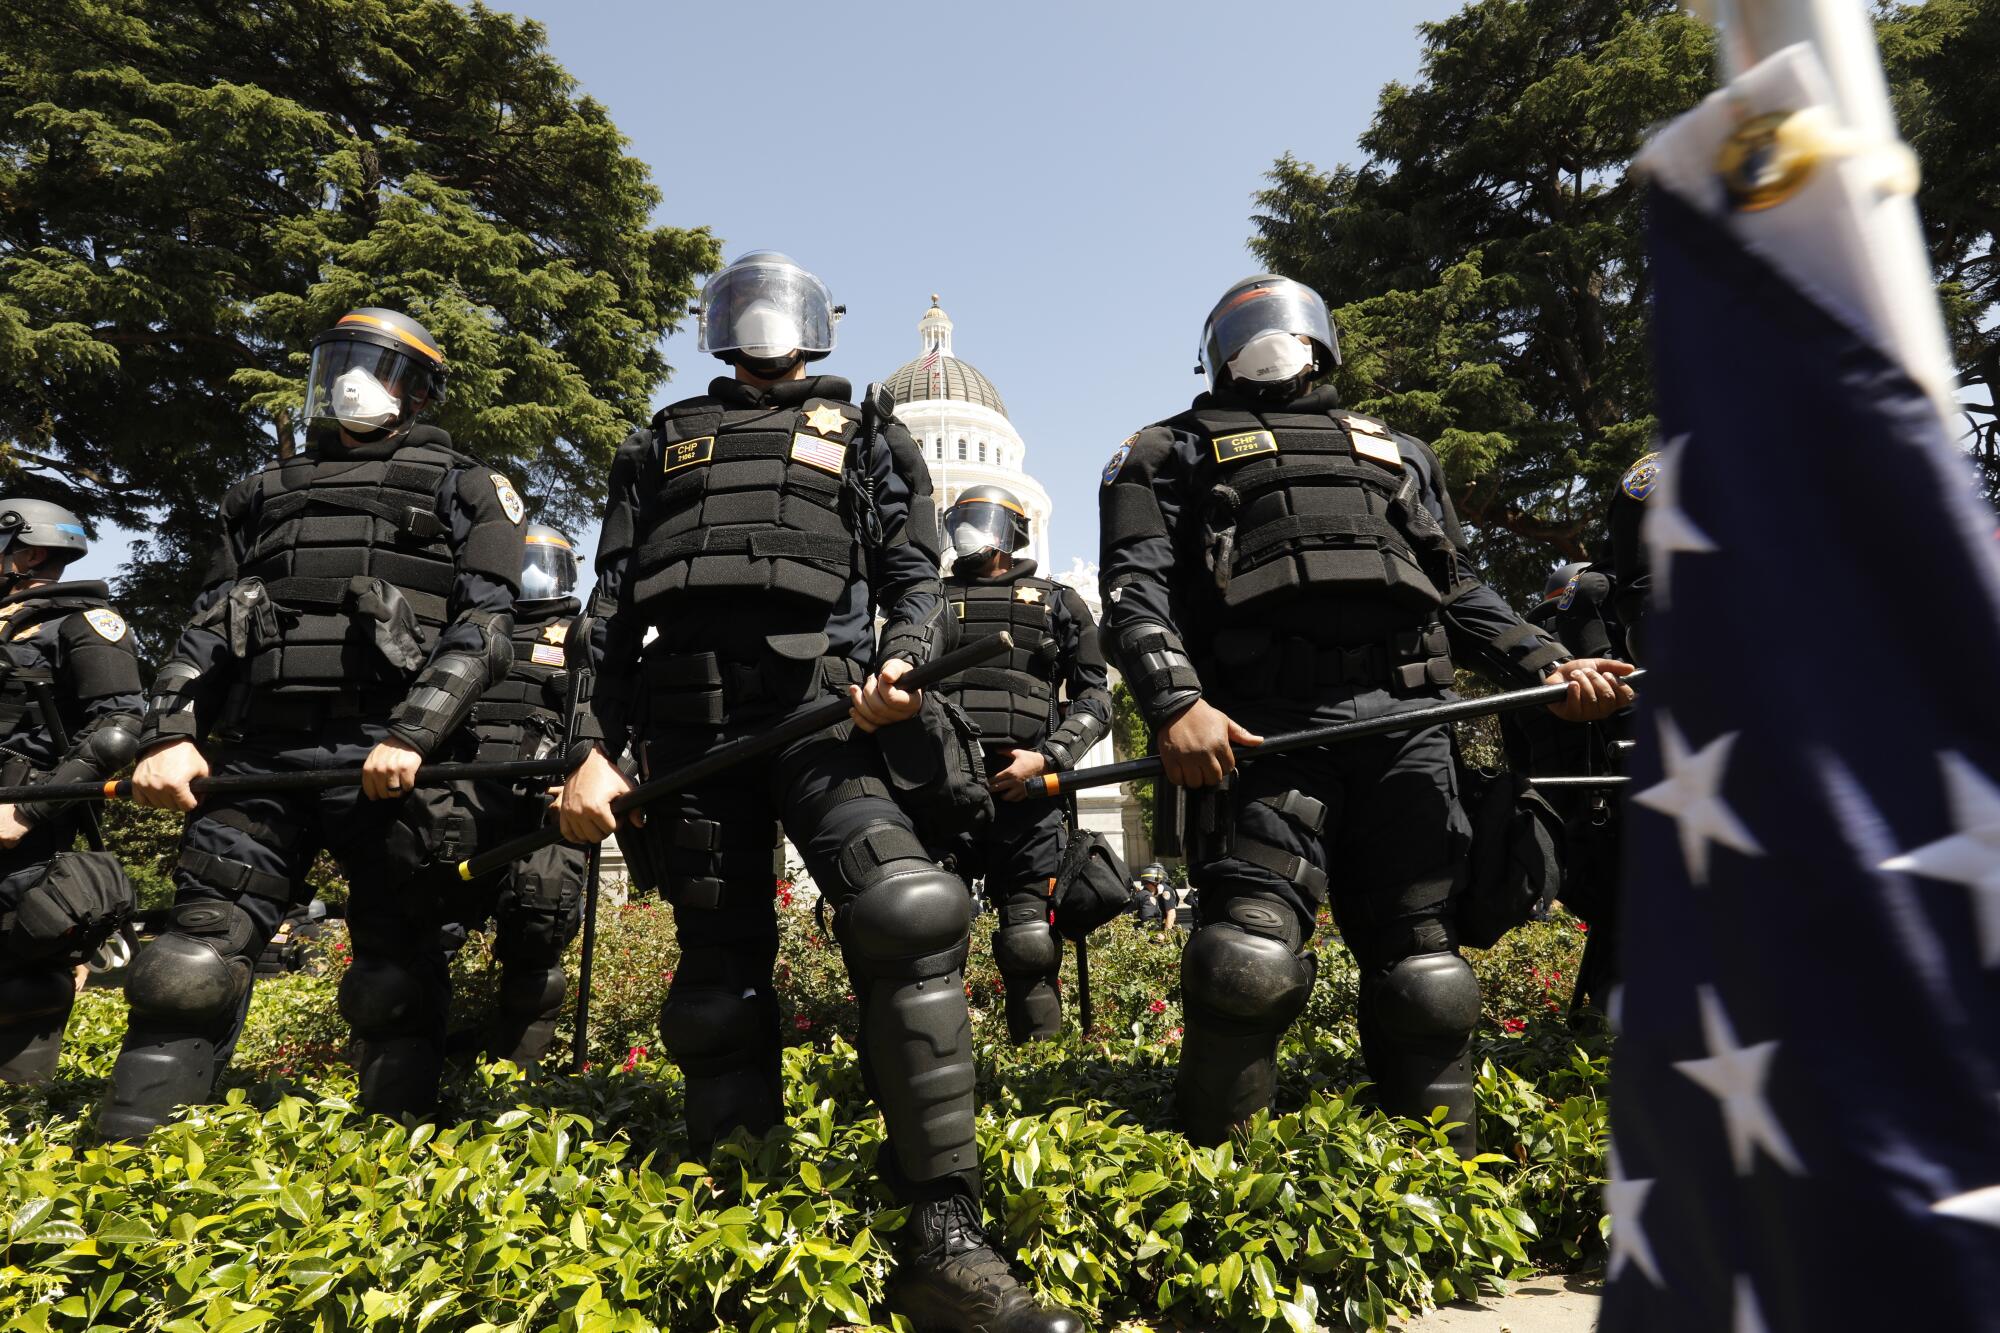 CHP officers wearing riot gear line the edge of the California State Capital grounds after removing protesters.